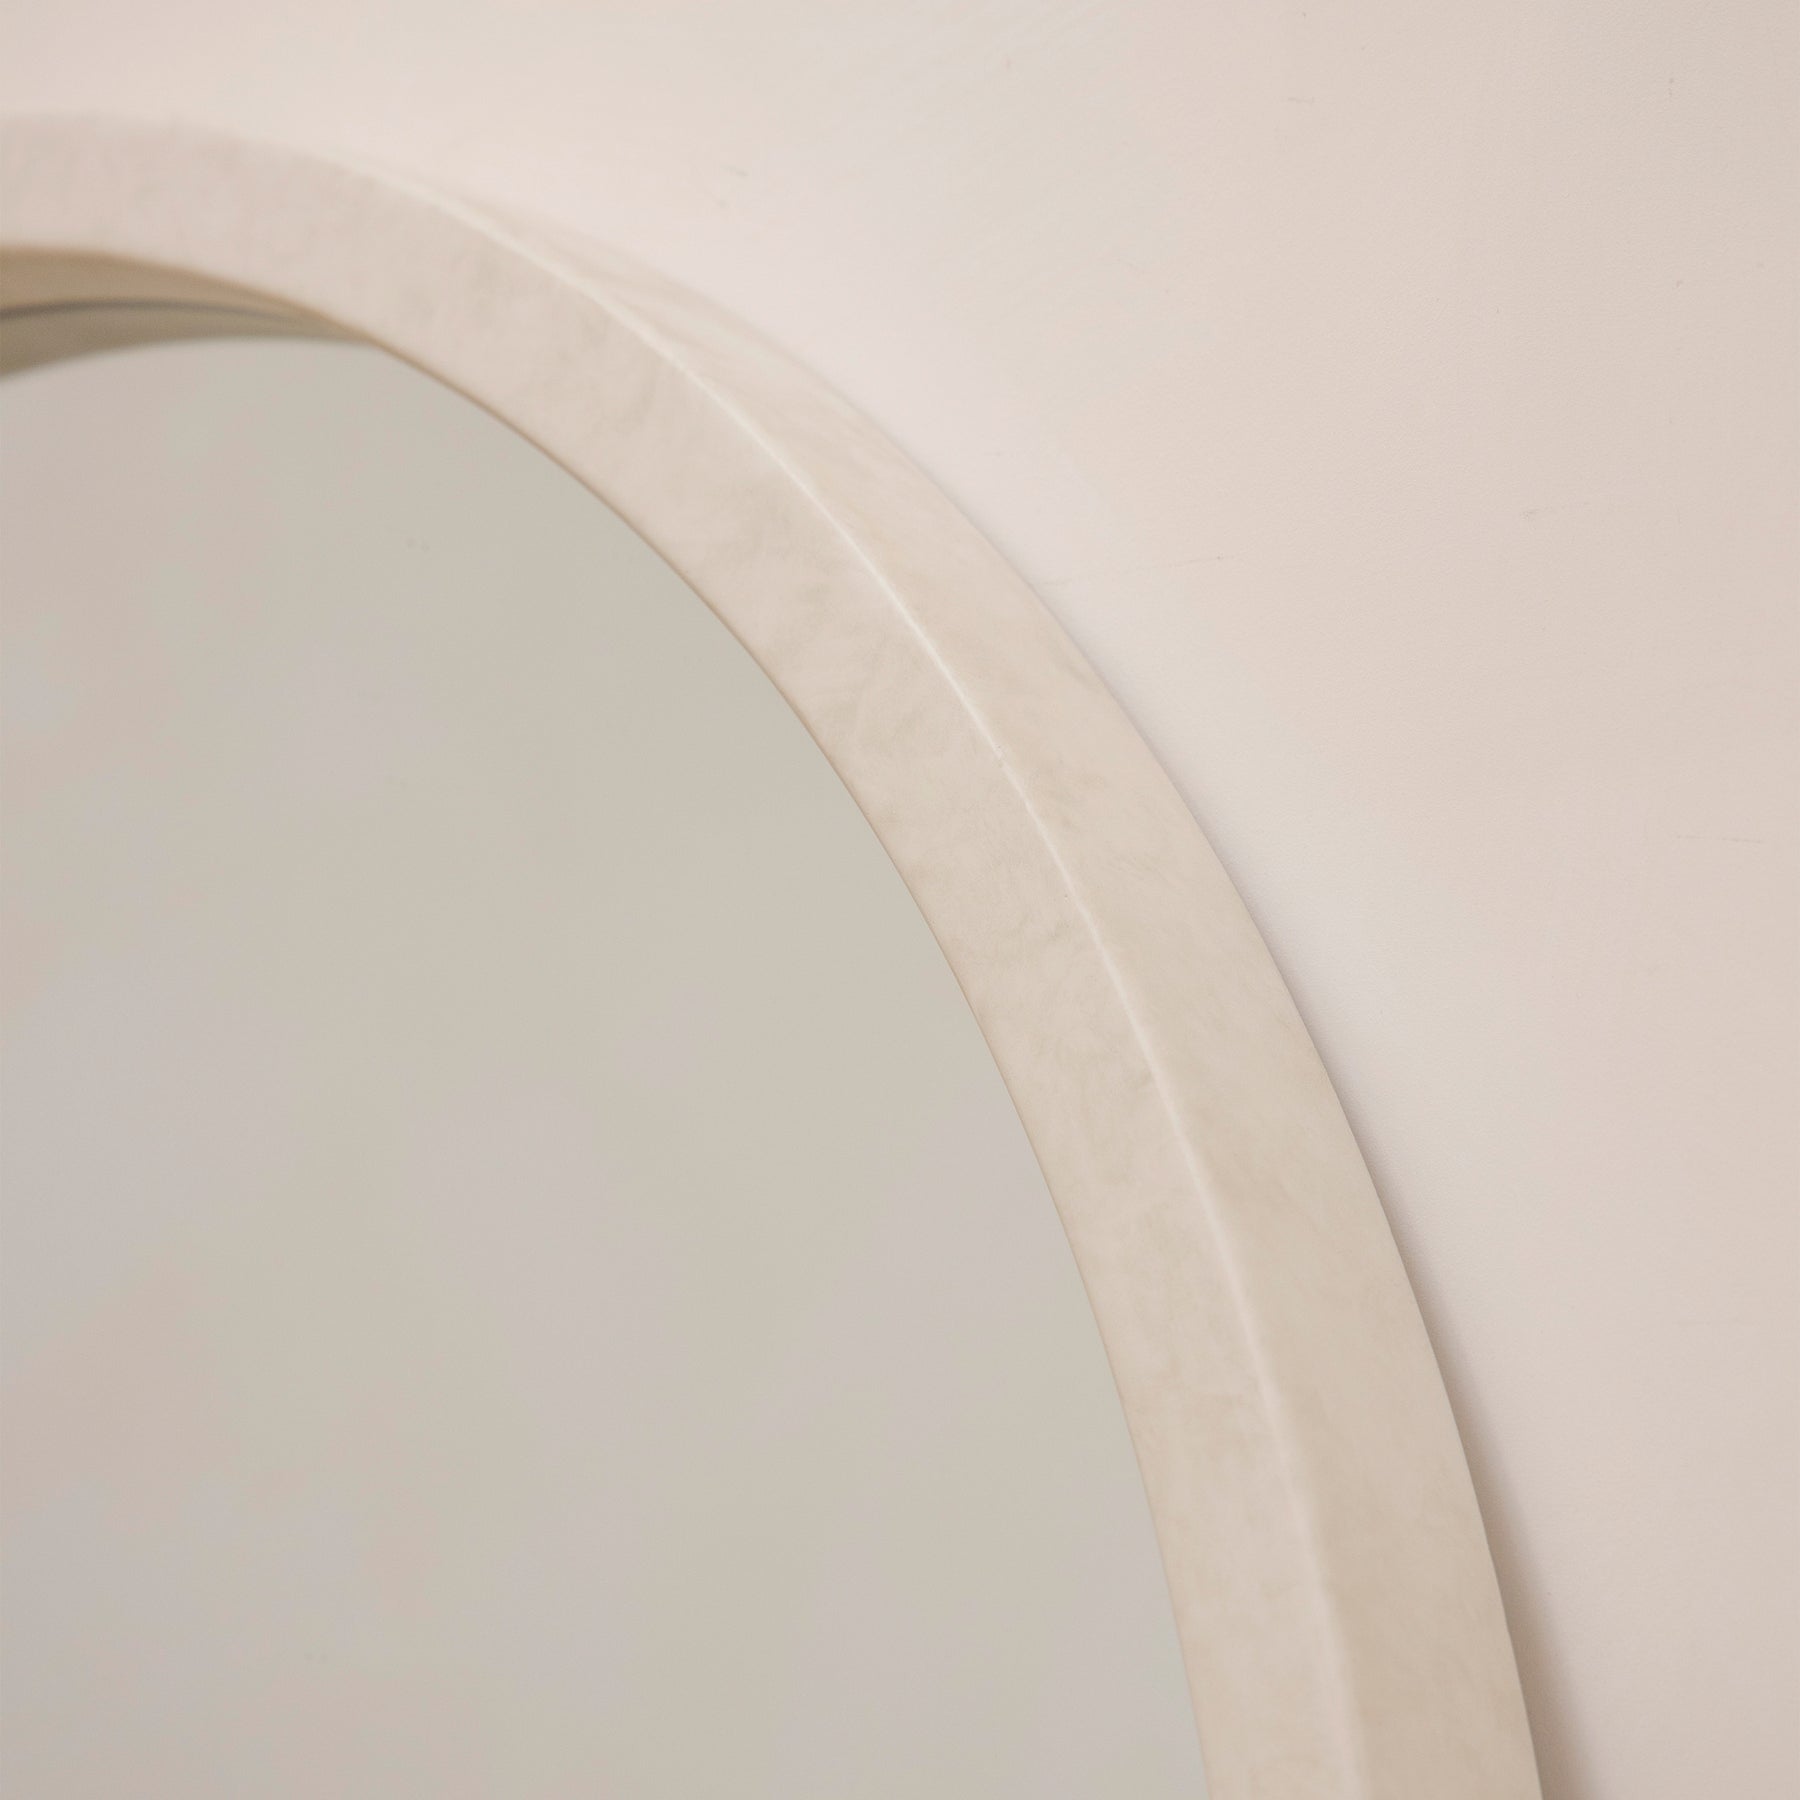 Detail shot of Full Length Extra Large Arched Concrete Mirror arched frame design